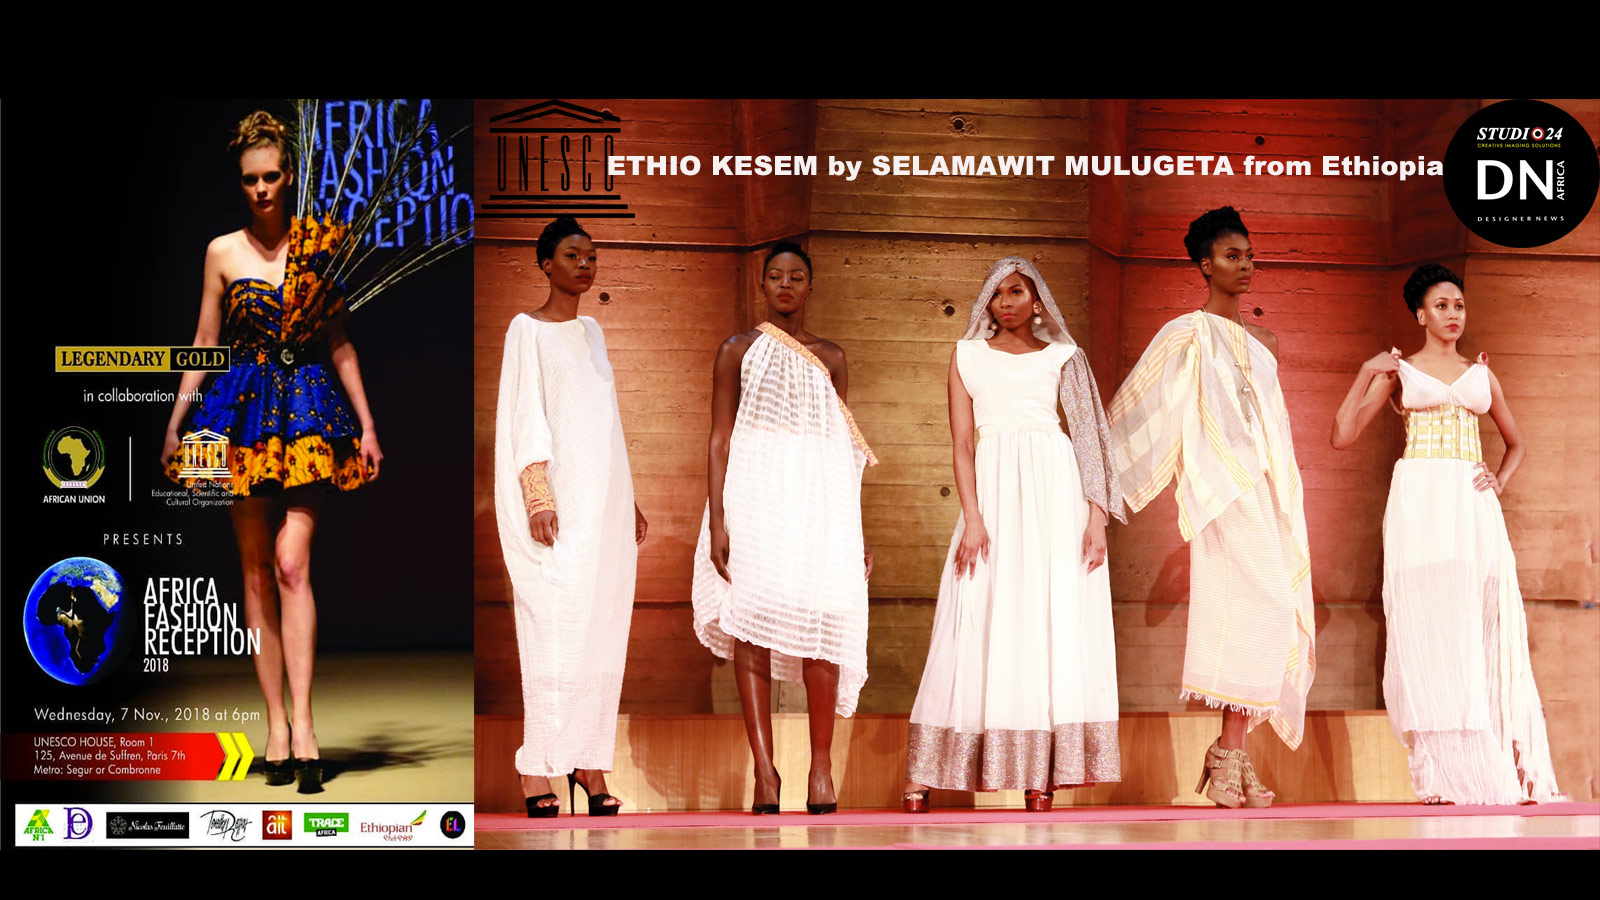 AFRICAN FASHION STYLE MAGAZINE - ETHIO KESEM by SELAMAWIT MULUGETA from Ethiopia - with AFRICA FASHION RECEPTION PARIS 2018  - SEASON IV at UNESCO - Official Media Partner DN AFRICA -STUDIO 24 NIGERIA - STUDIO 24 INTERNATIONAL - Ifeanyi Christopher Oputa MD AND CEO OF COLVI LIMITED AND STUDIO 24